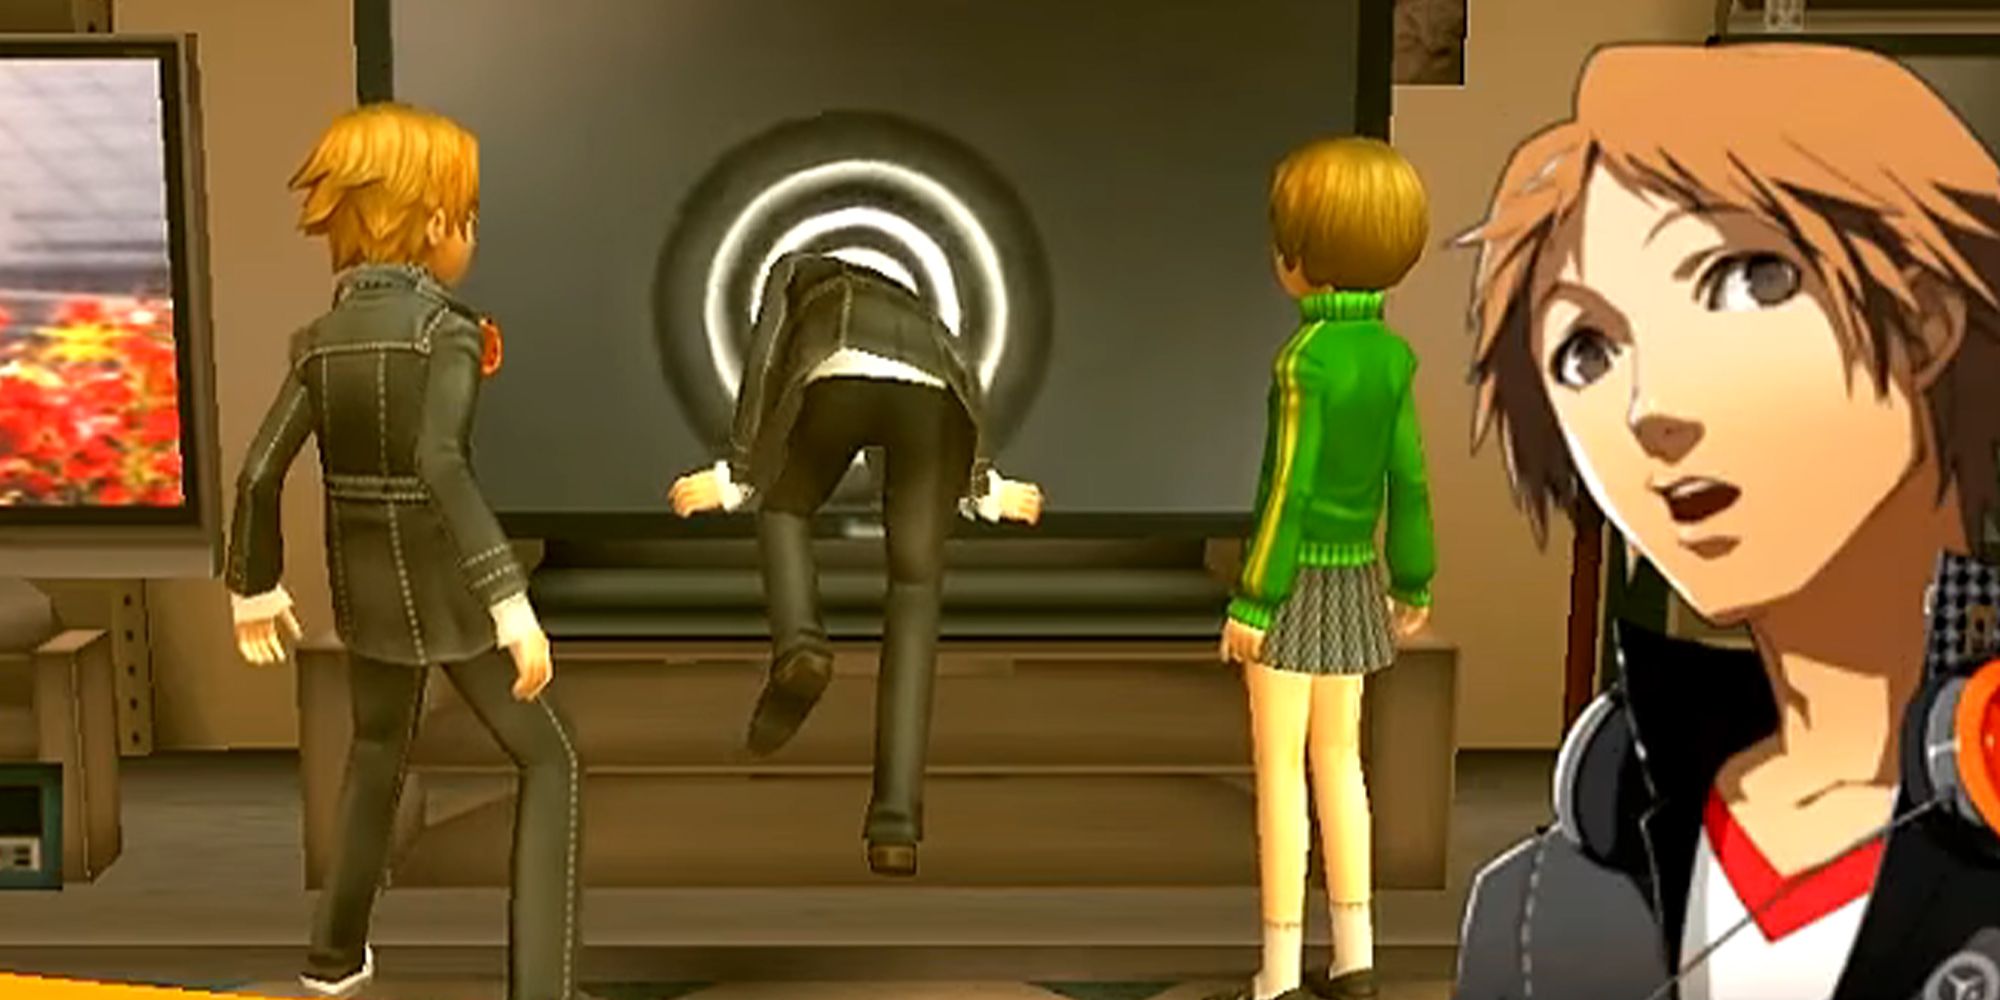 Persona 4 character getting sucked into a TV